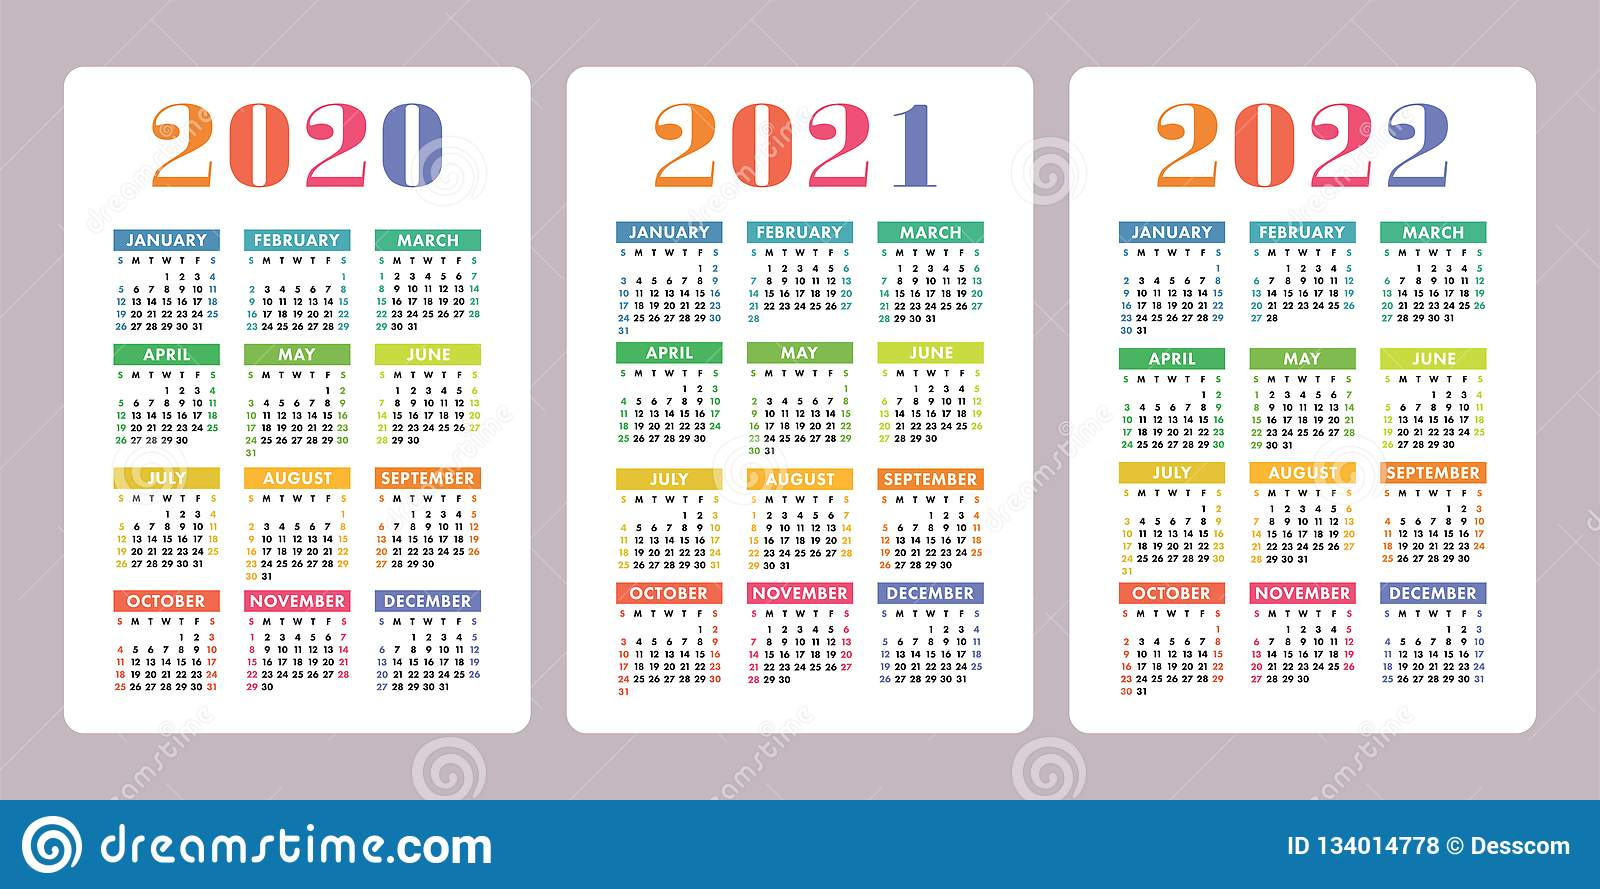 Printable 3 Year Il Caemdar 2020-2022 | Example Calendar 3 Calendars On One Page